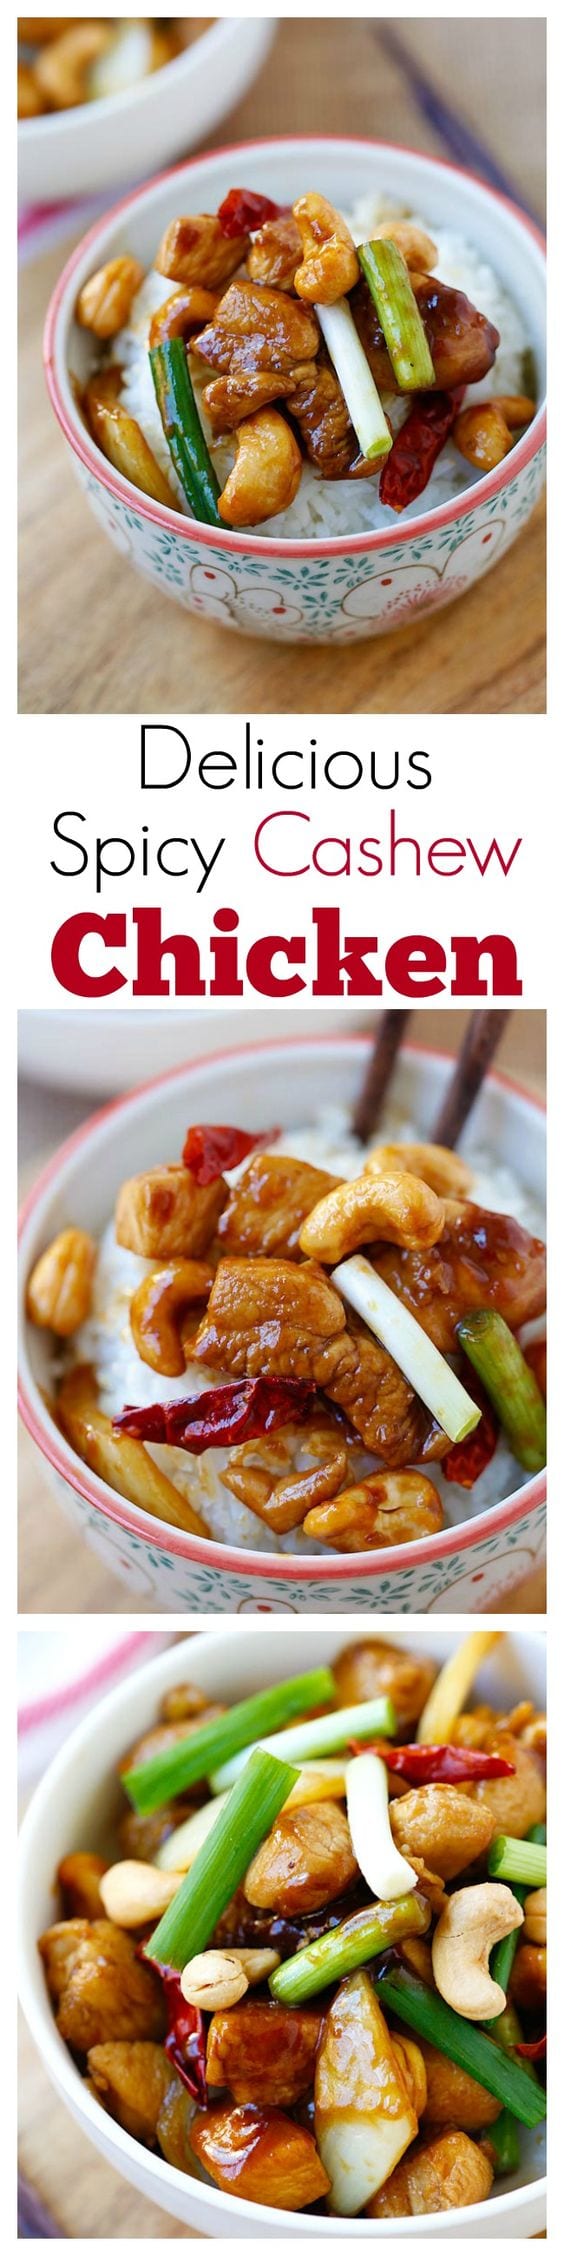 Spicy Cashew Chicken – easy and delicious chicken with cashew nuts with just the right amount of heat. Takes 20 mins to make and much better than takeout | rasamalaysia.com